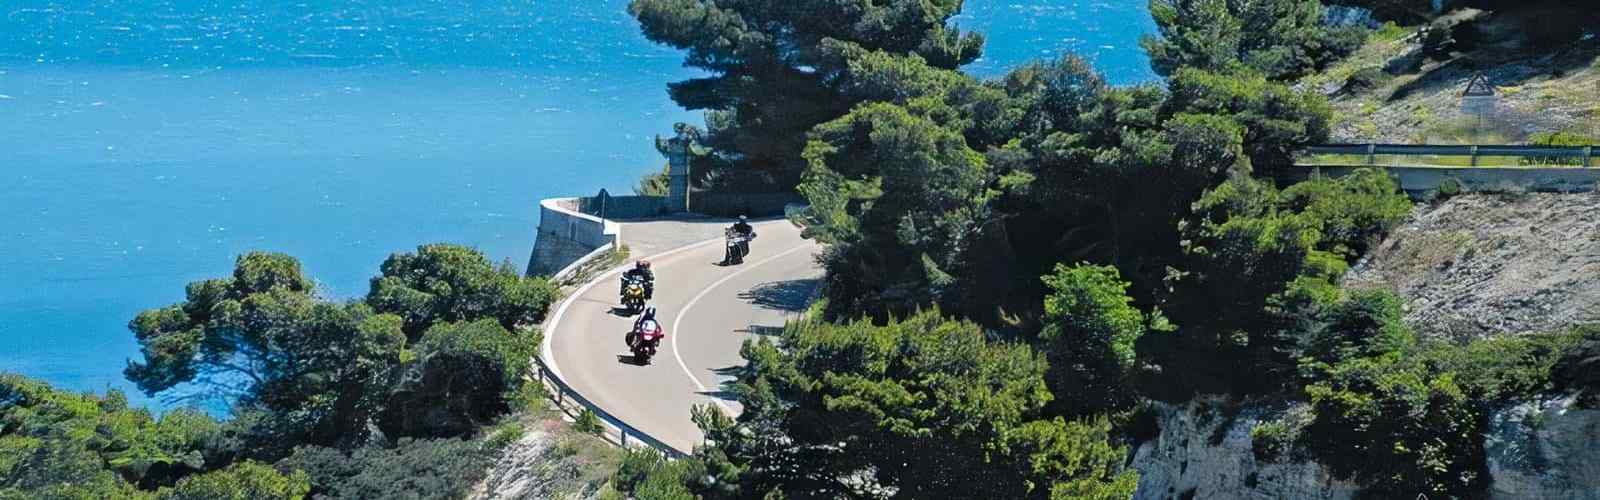 Sicily motorcycle ride on the southern coast of the island